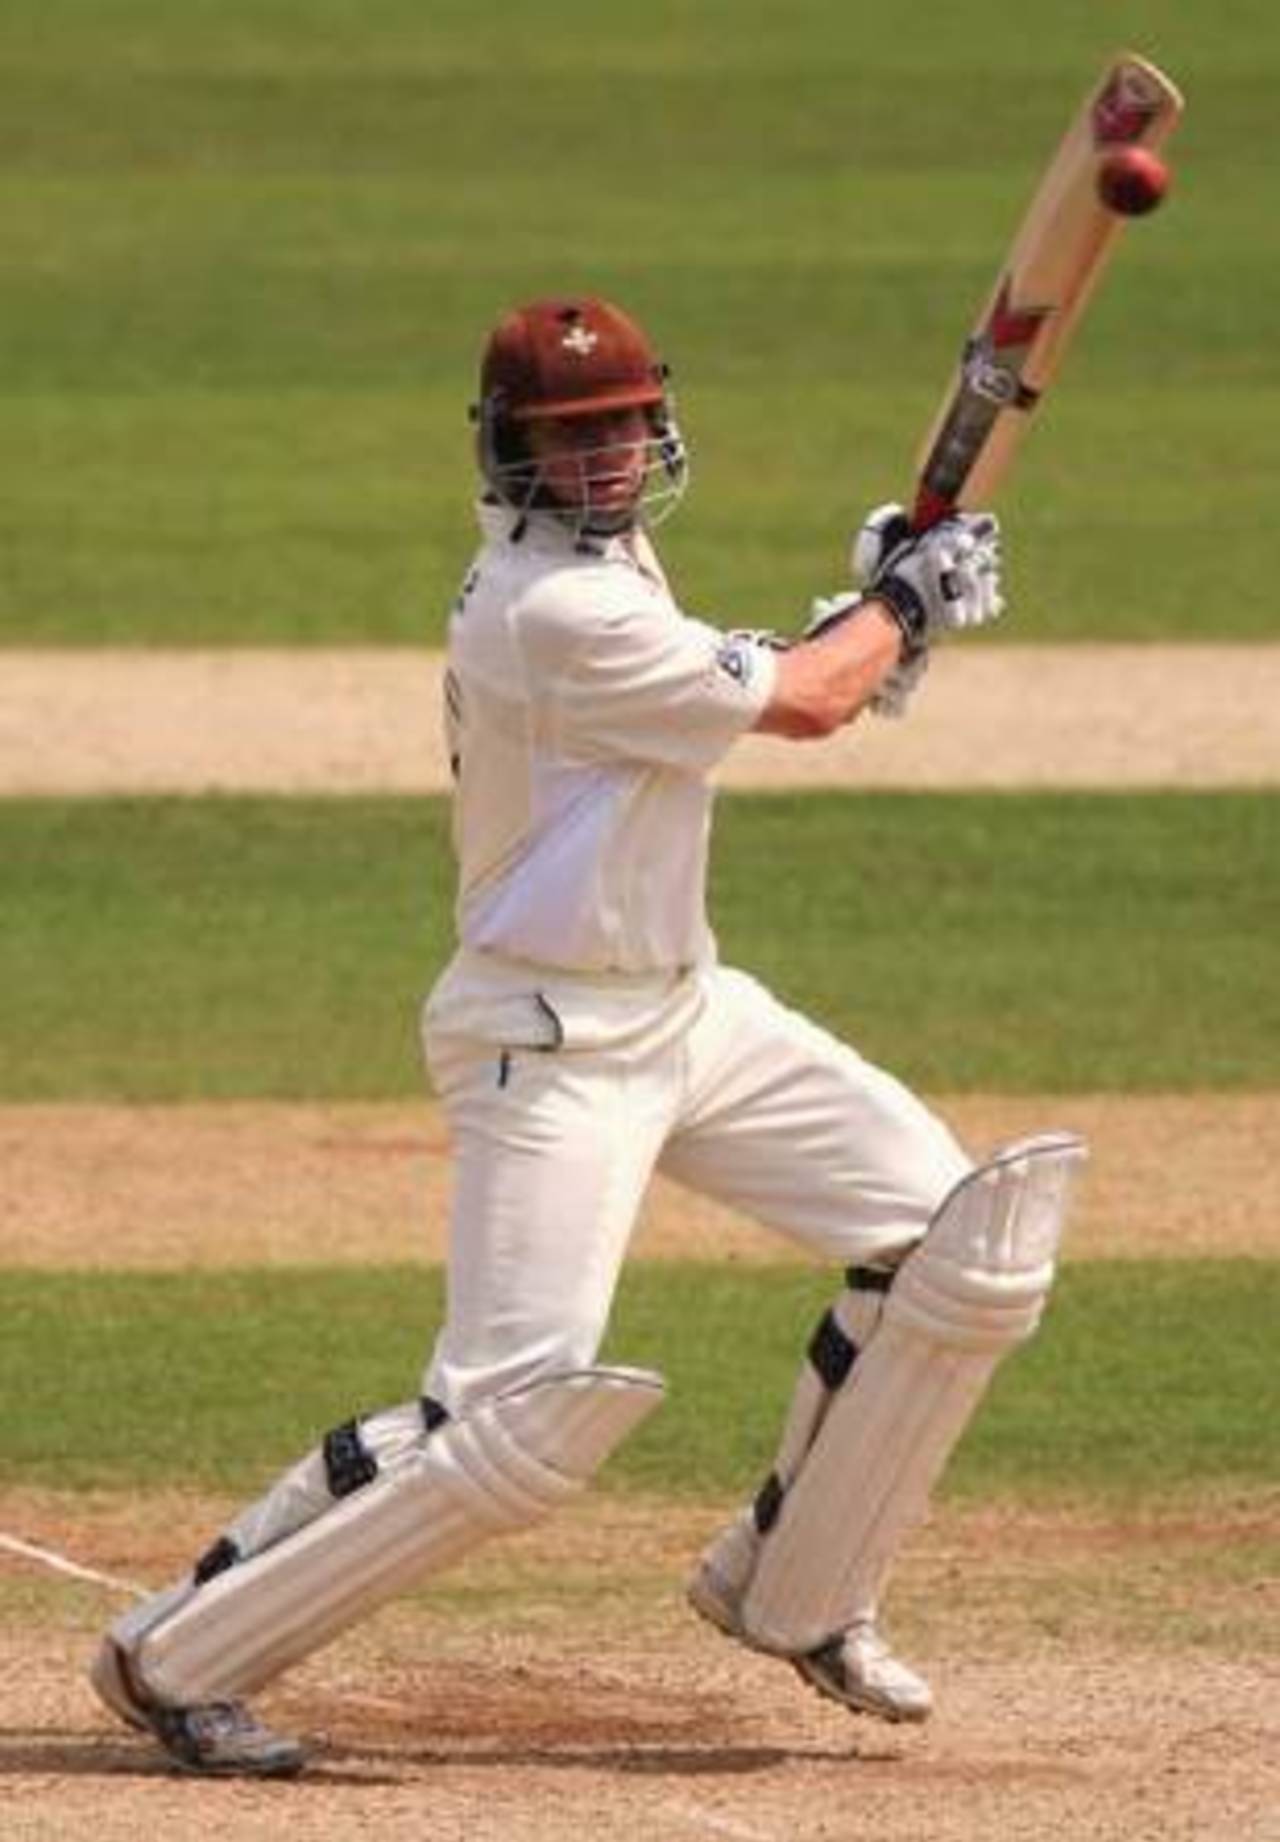 Jonathan Batty square drives during his century, Surrey v Kent, 2nd day, The Oval, June 30, 2008